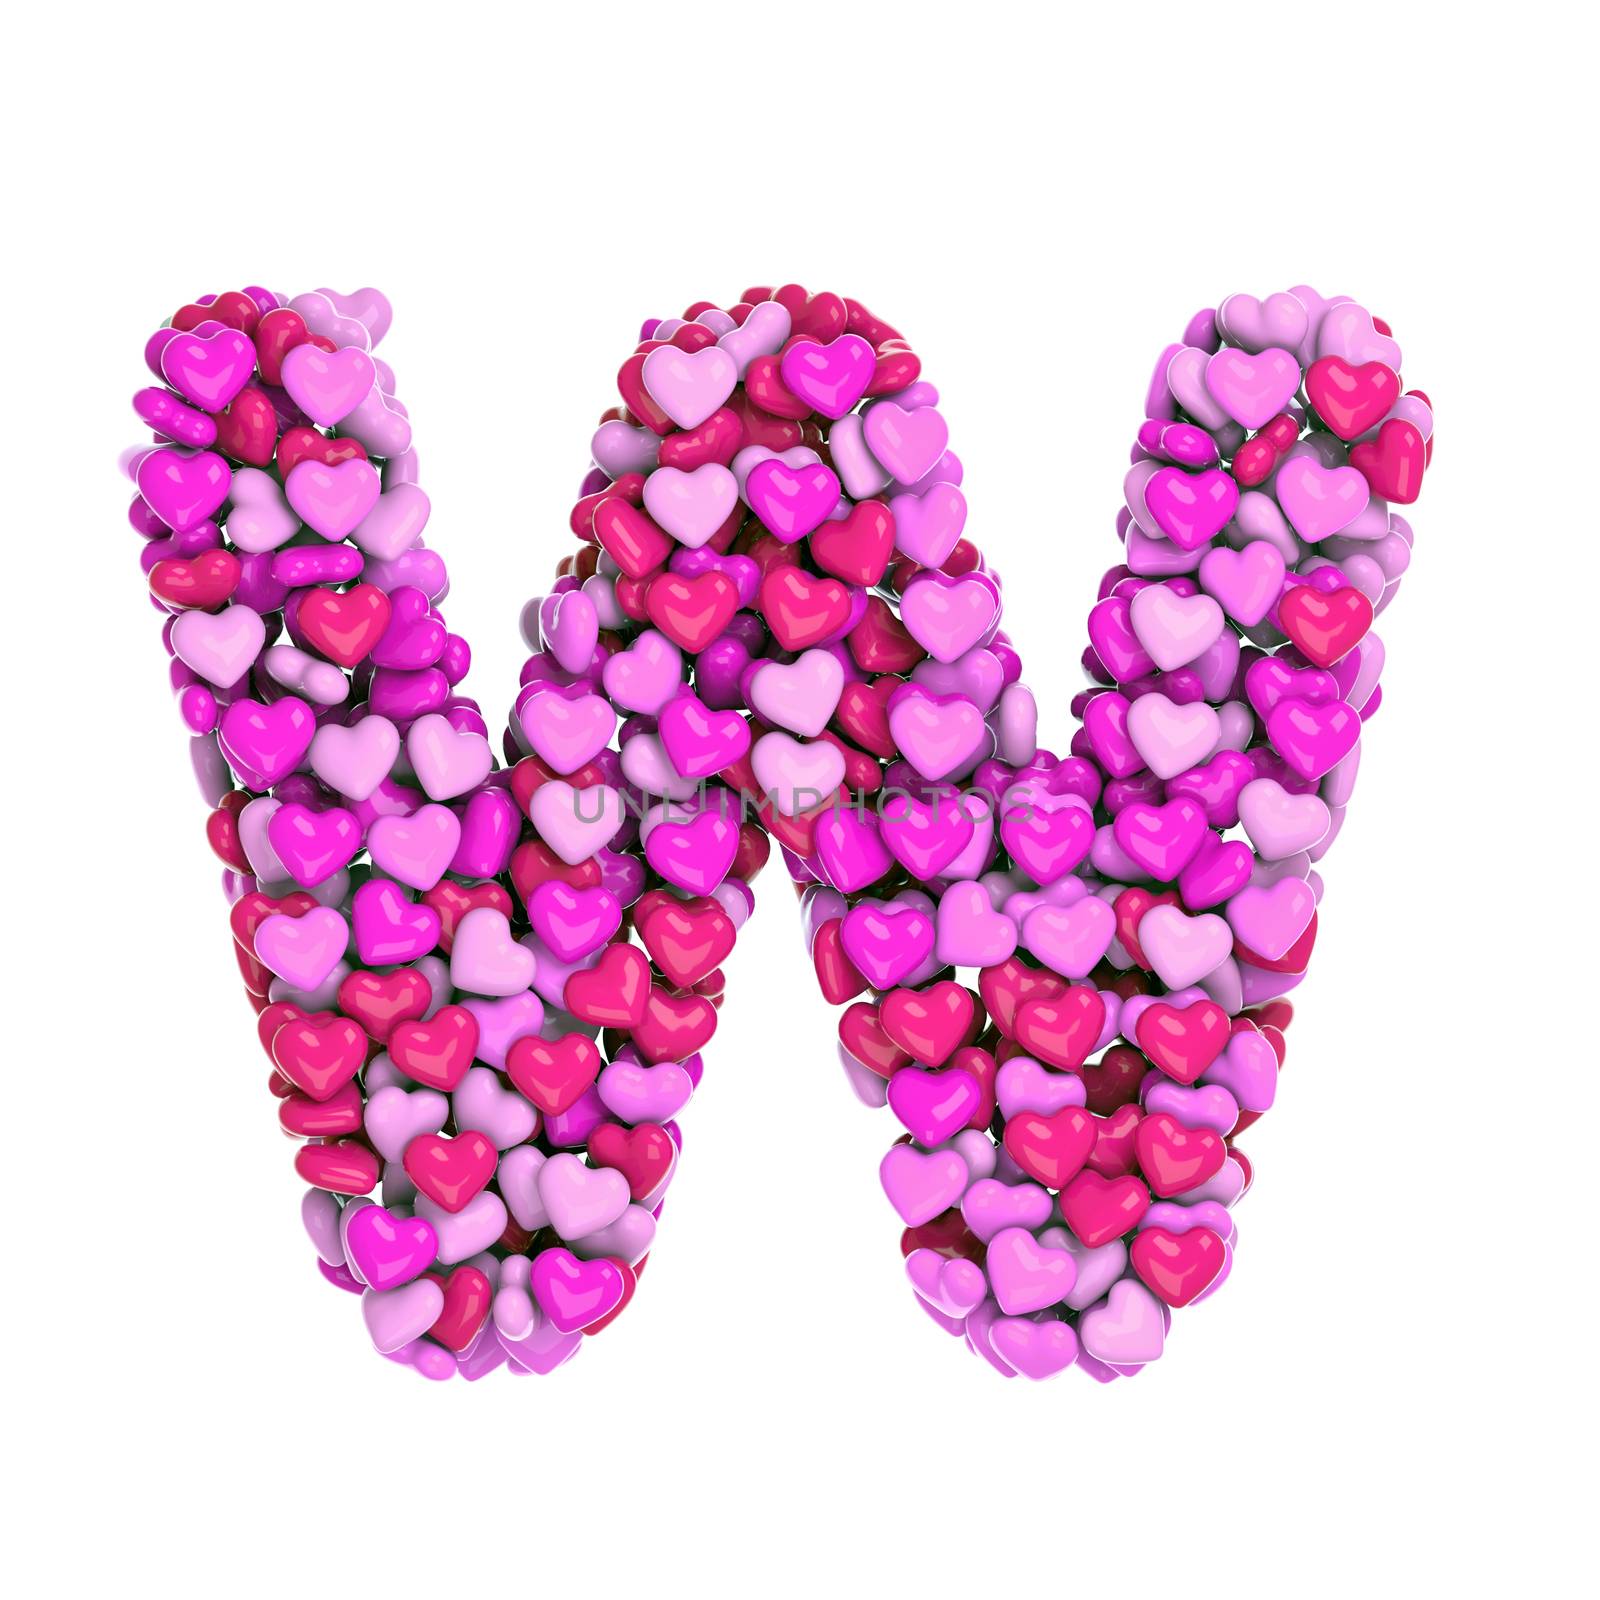 Valentine letter W - Uppercase 3d pink hearts font isolated on white background. This alphabet is perfect for creative illustrations related but not limited to Love, passion, wedding...